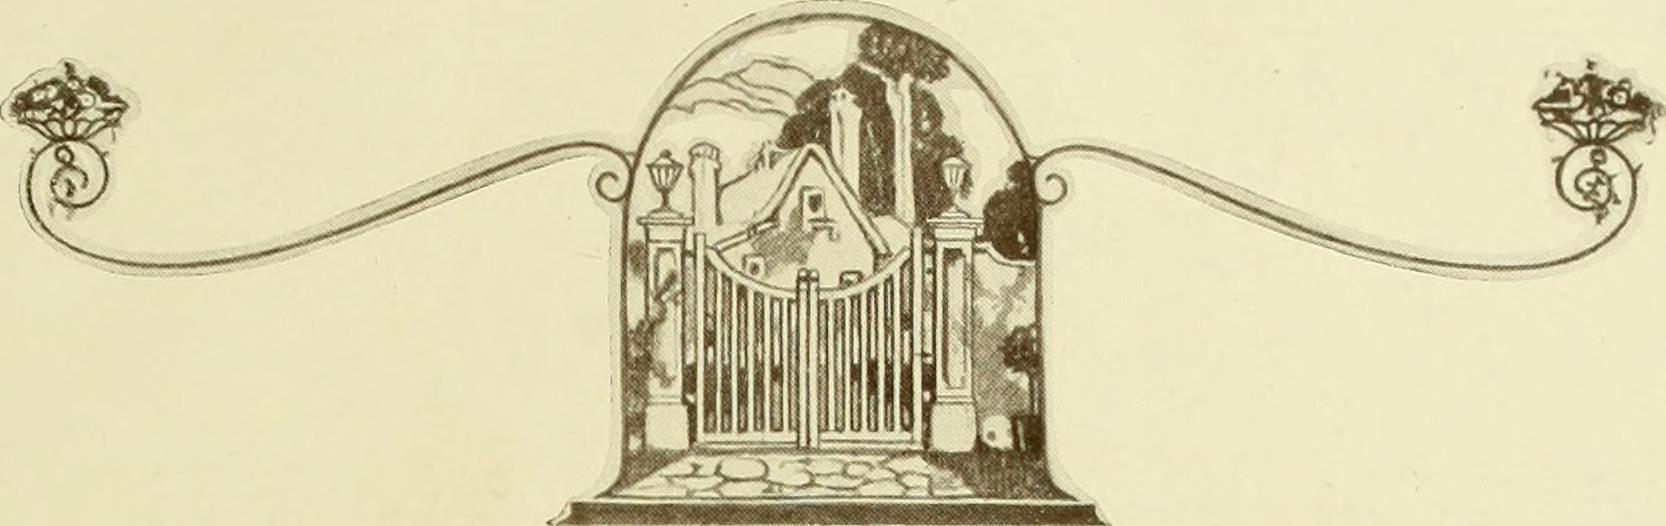 Image from page 162 of "Homes of character." (1920)